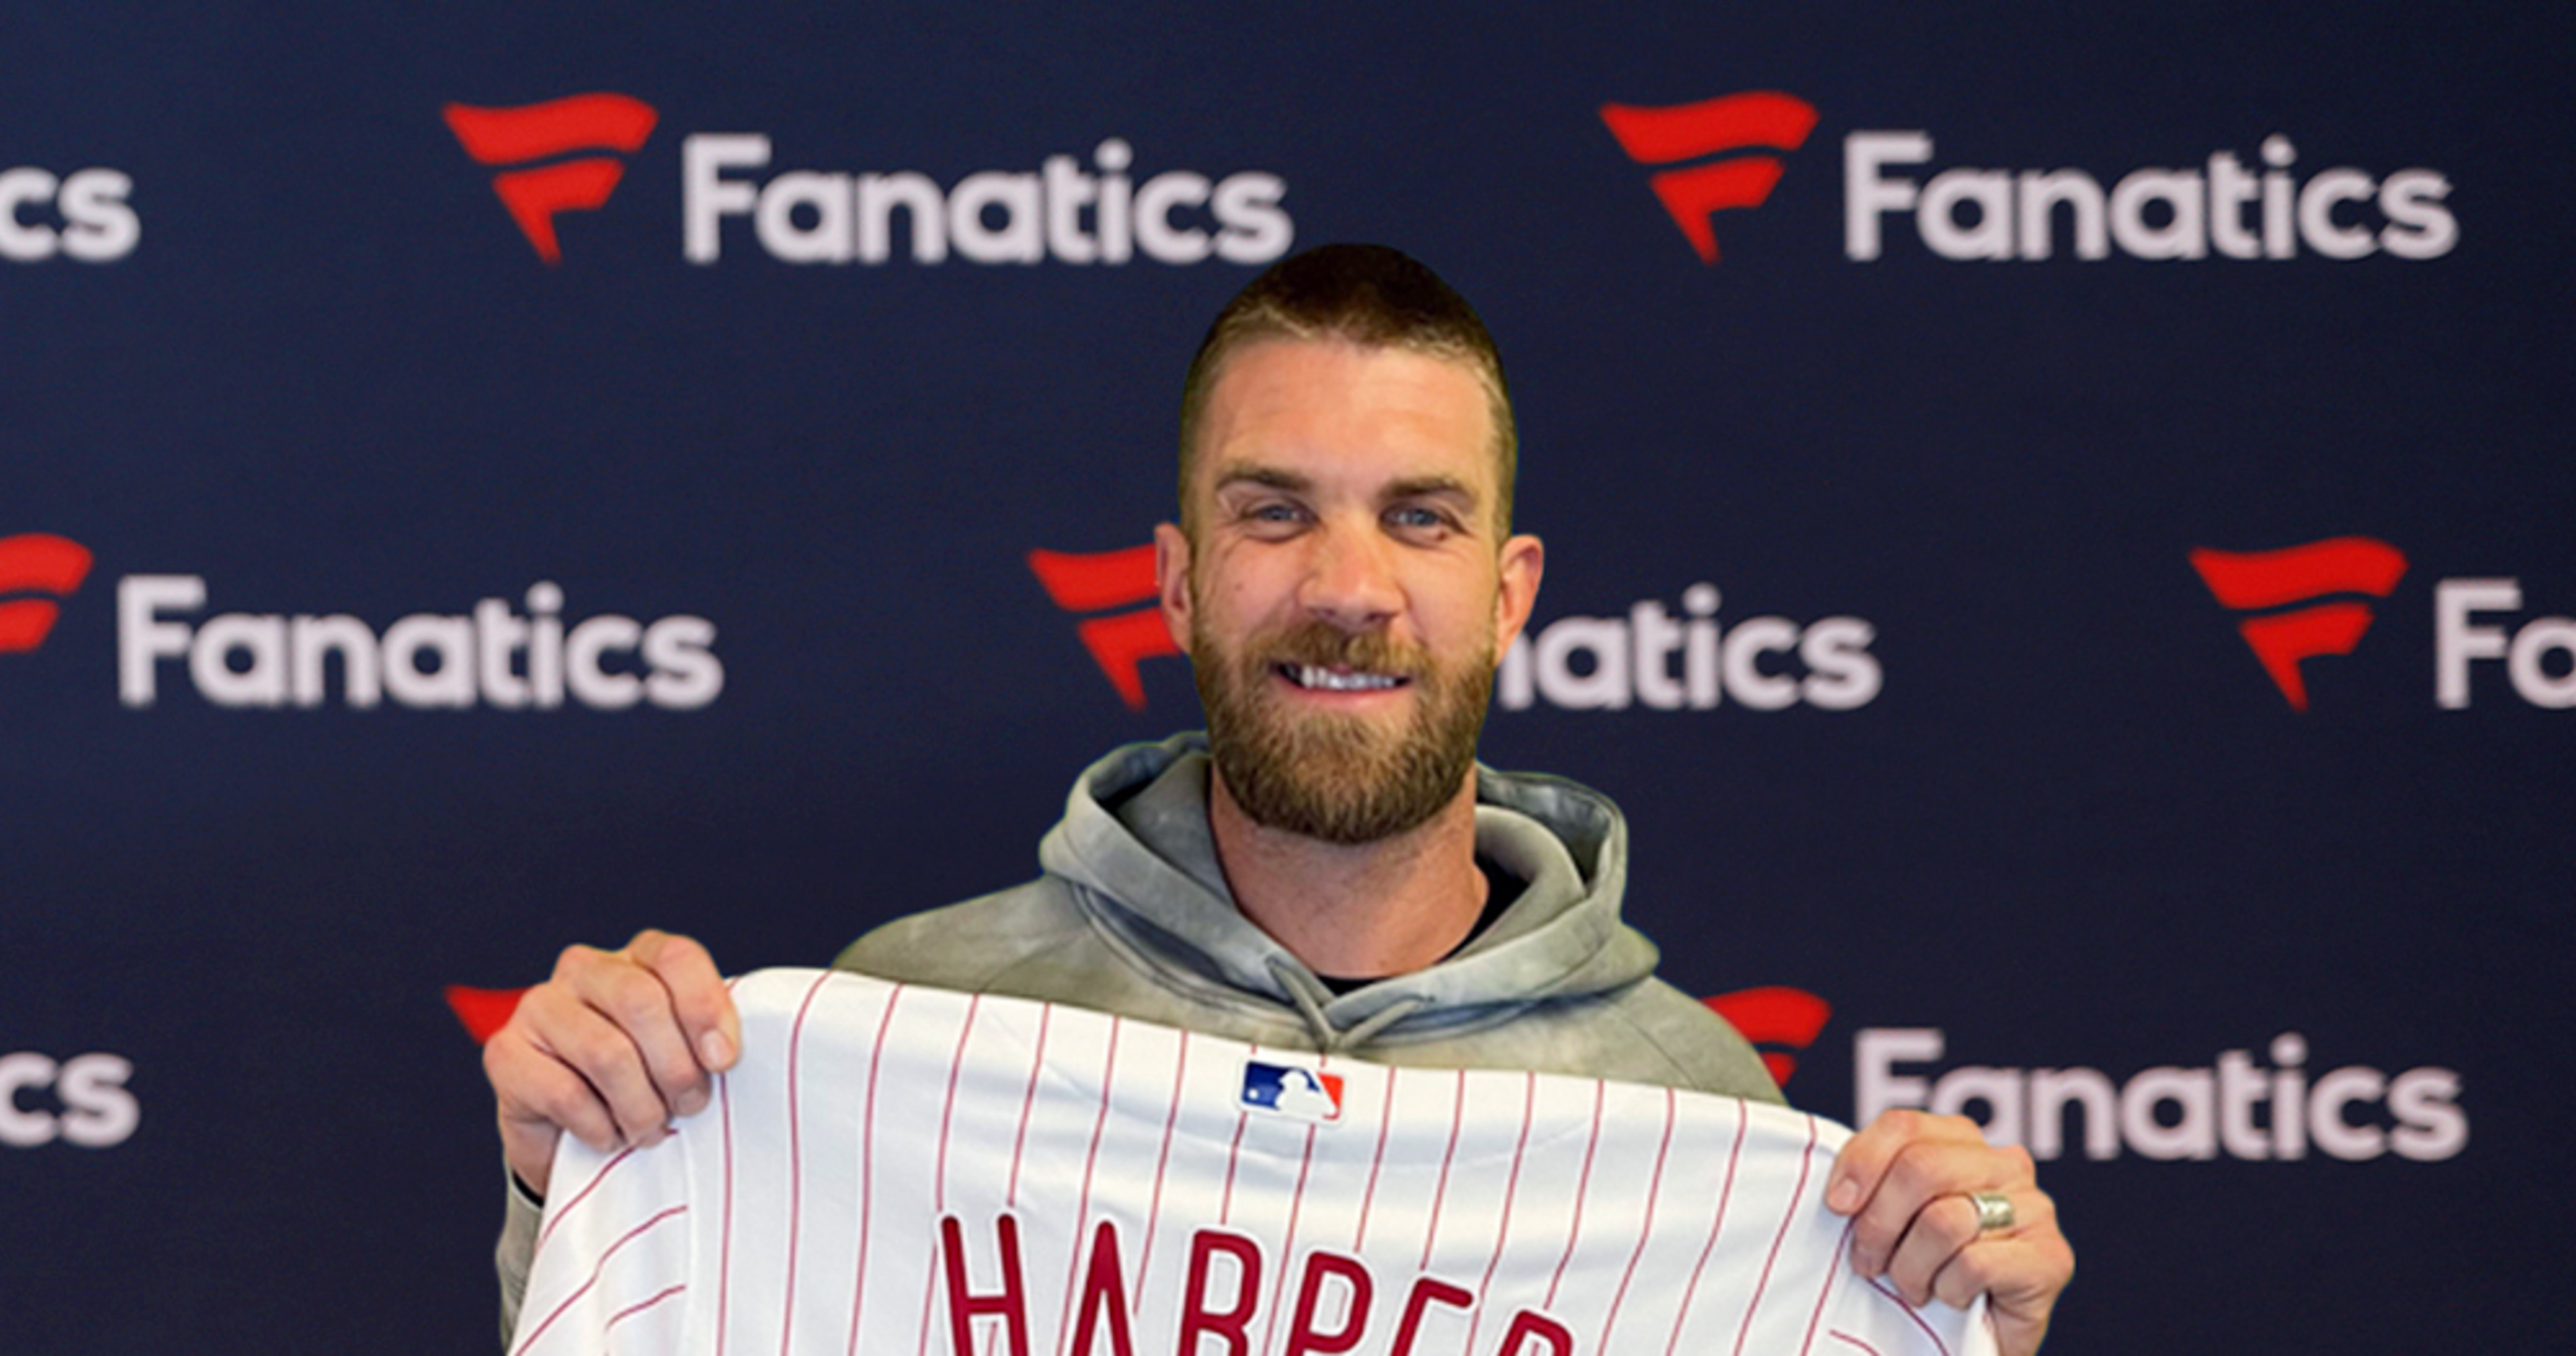 Fanatics and Reigning National League MVP Bryce Harper Team Up for